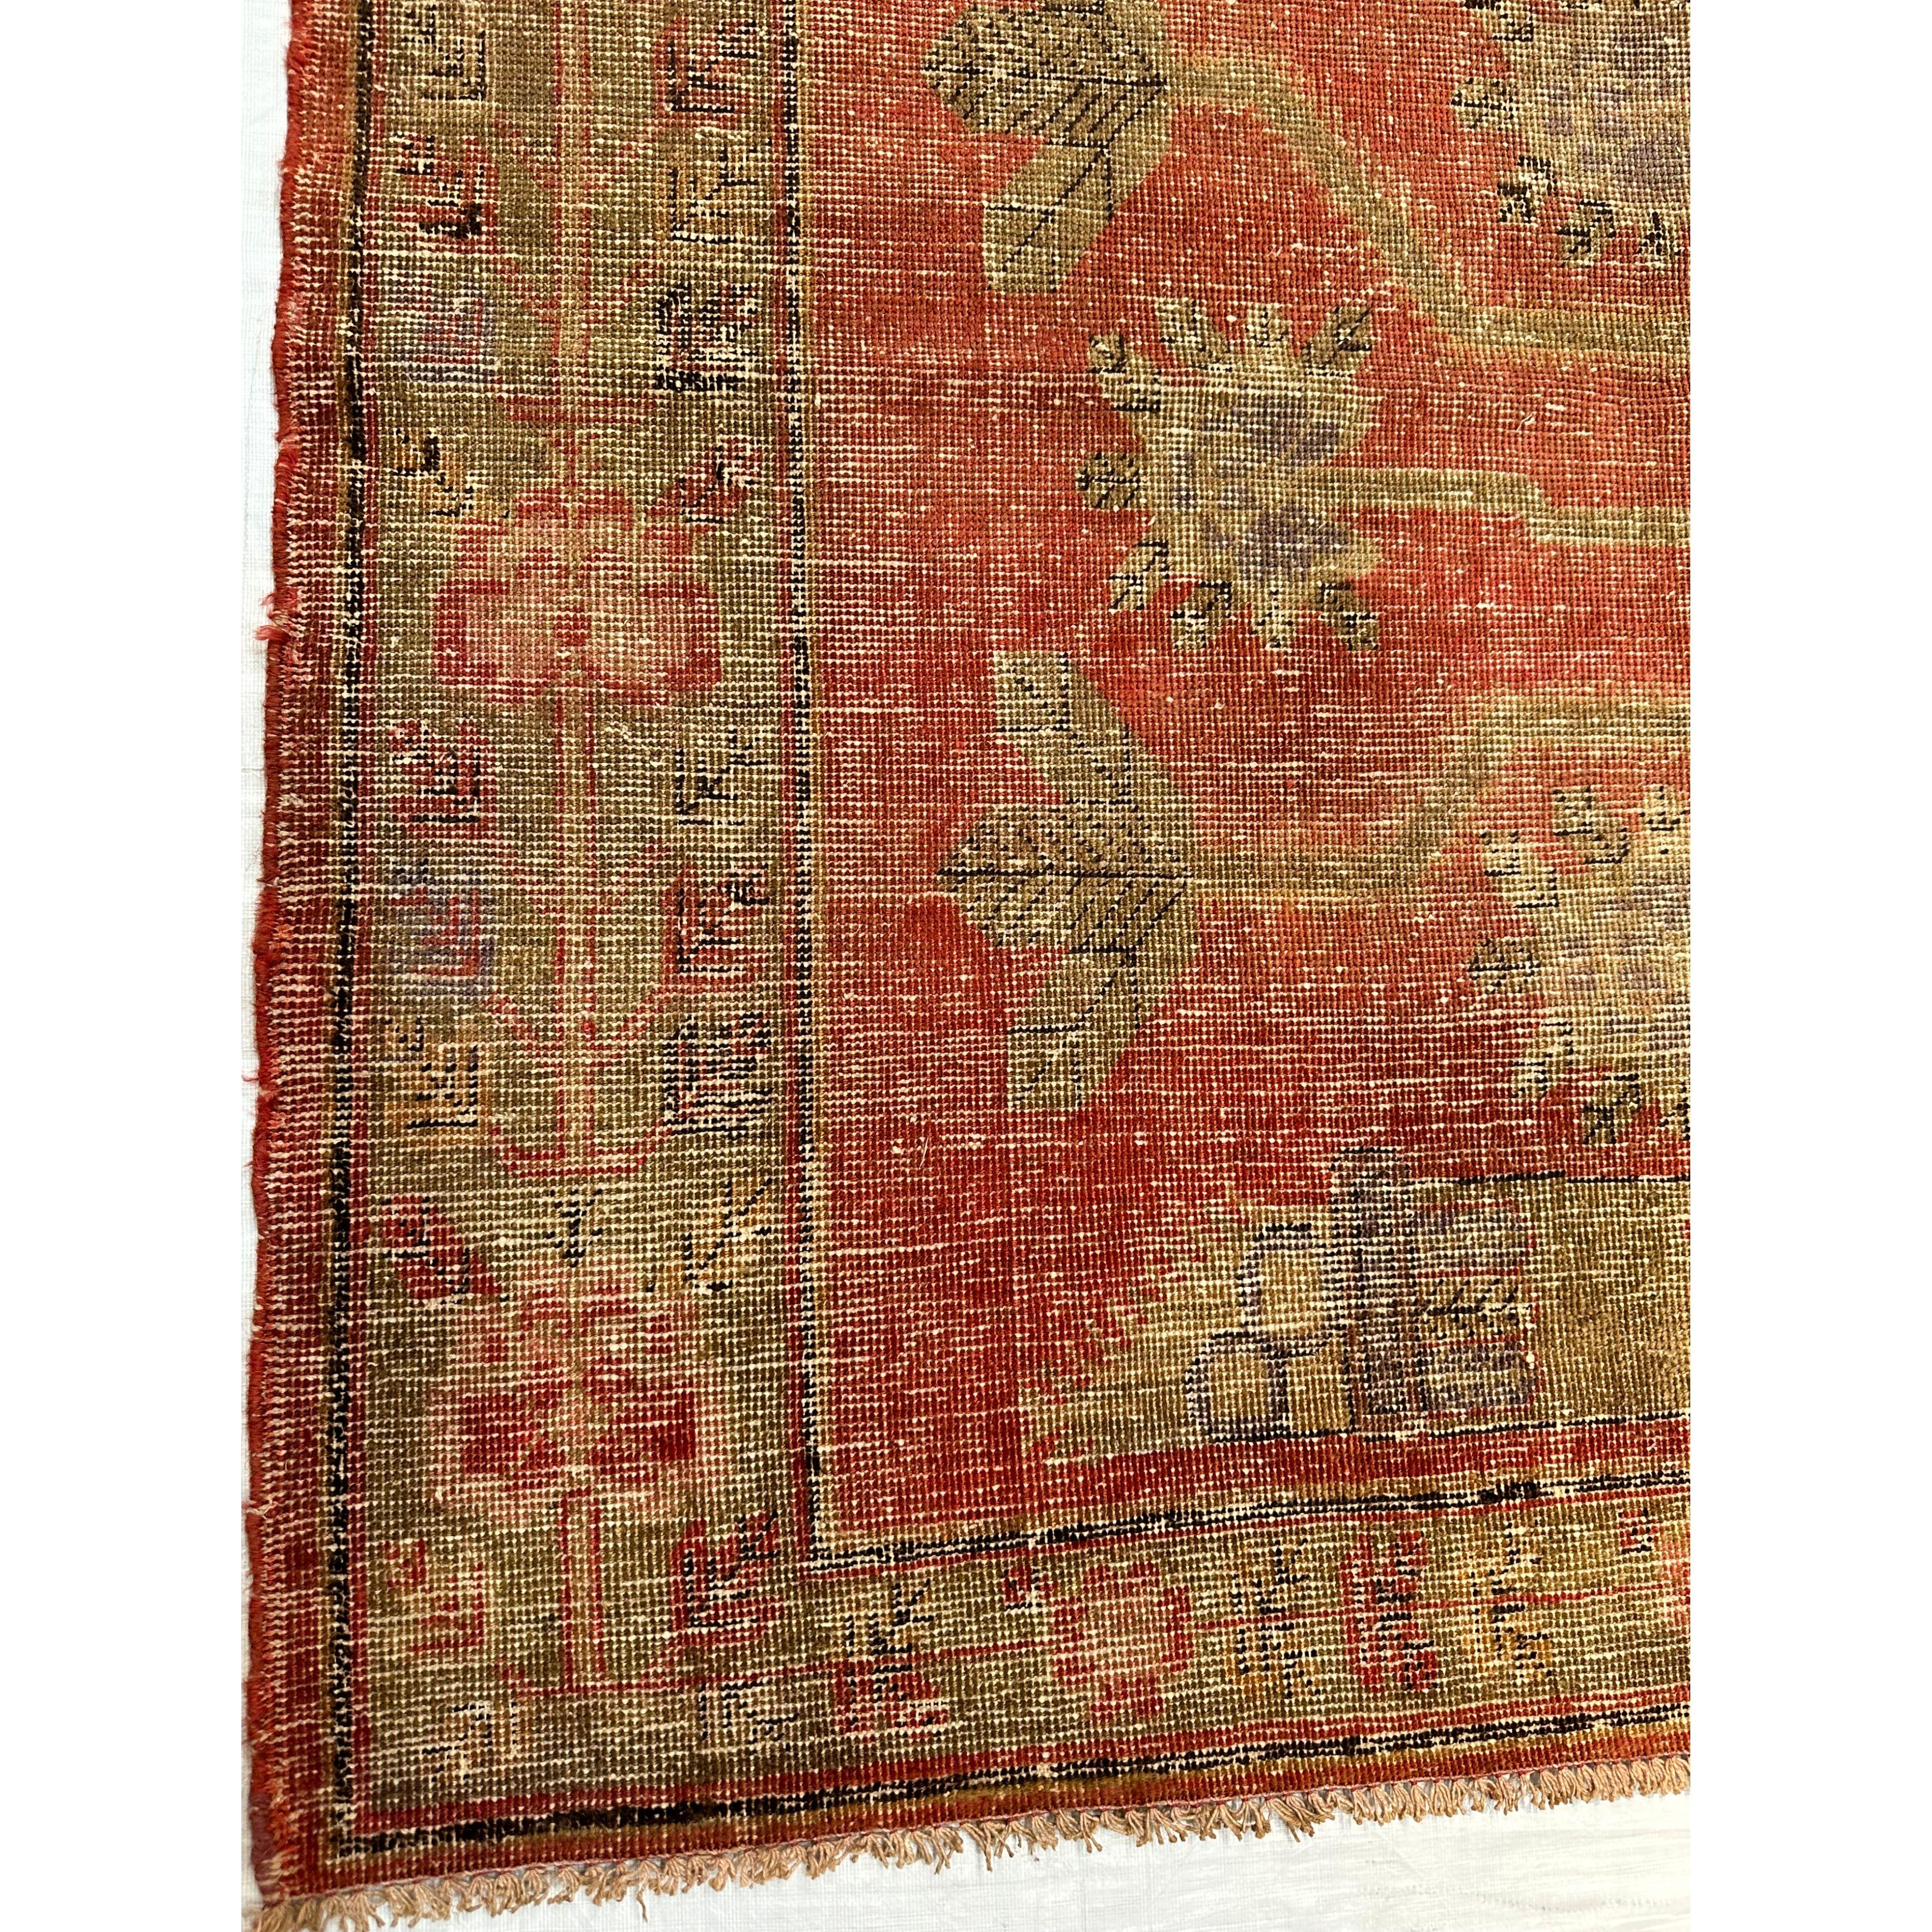 19th-Century Tribal Khotan Samarkand Rug In Good Condition For Sale In Los Angeles, US